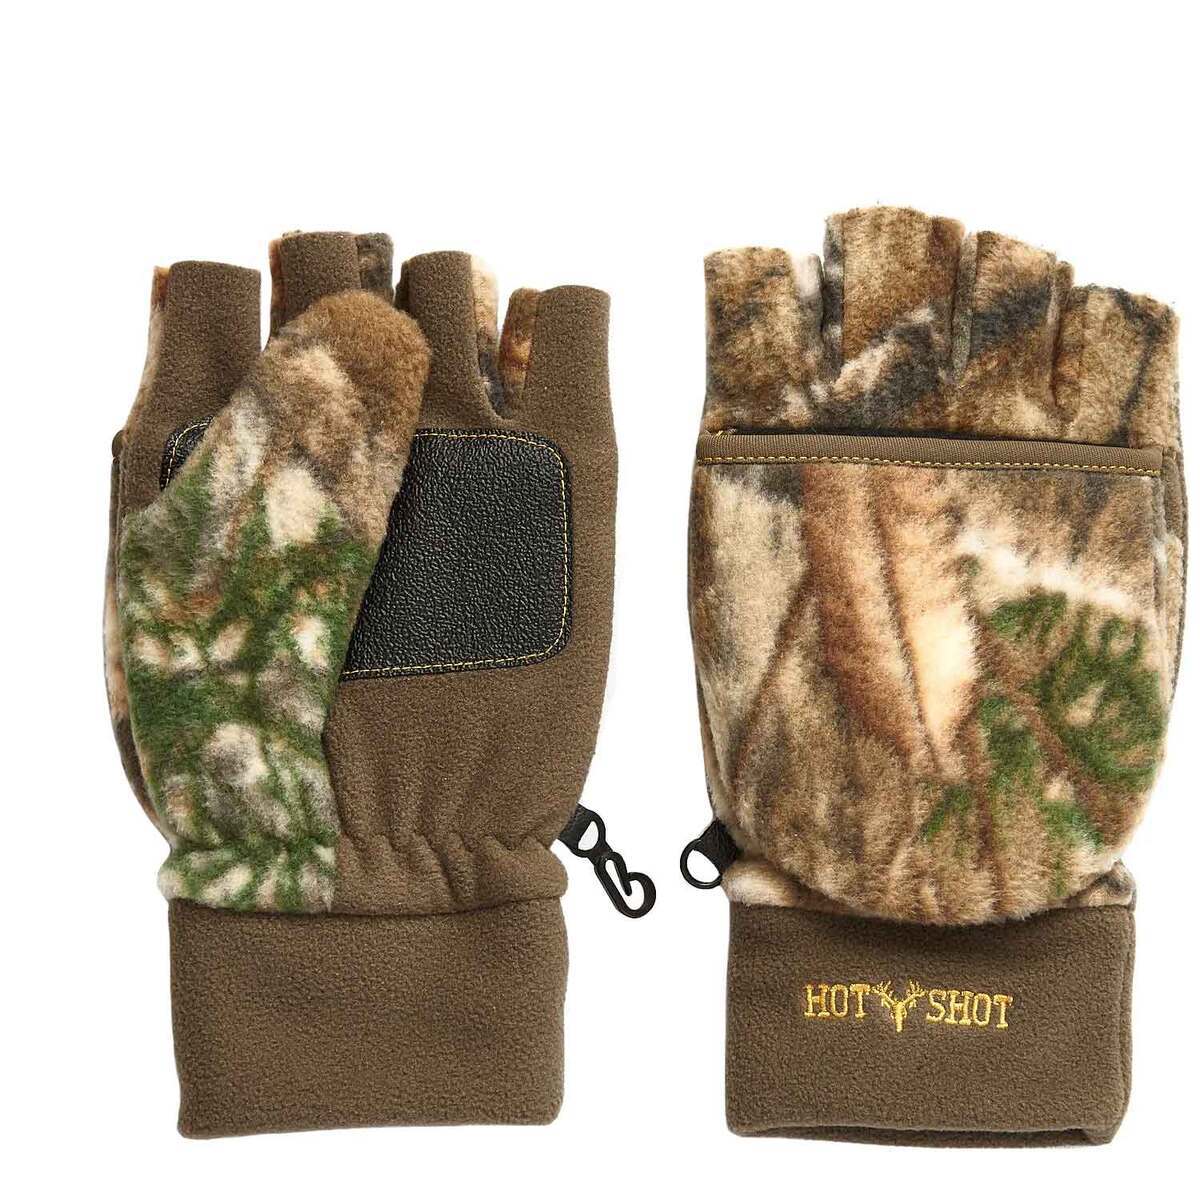 Men's Striker Thermal CHR Touch Glove - Realtree Camouflage Camo Gloves